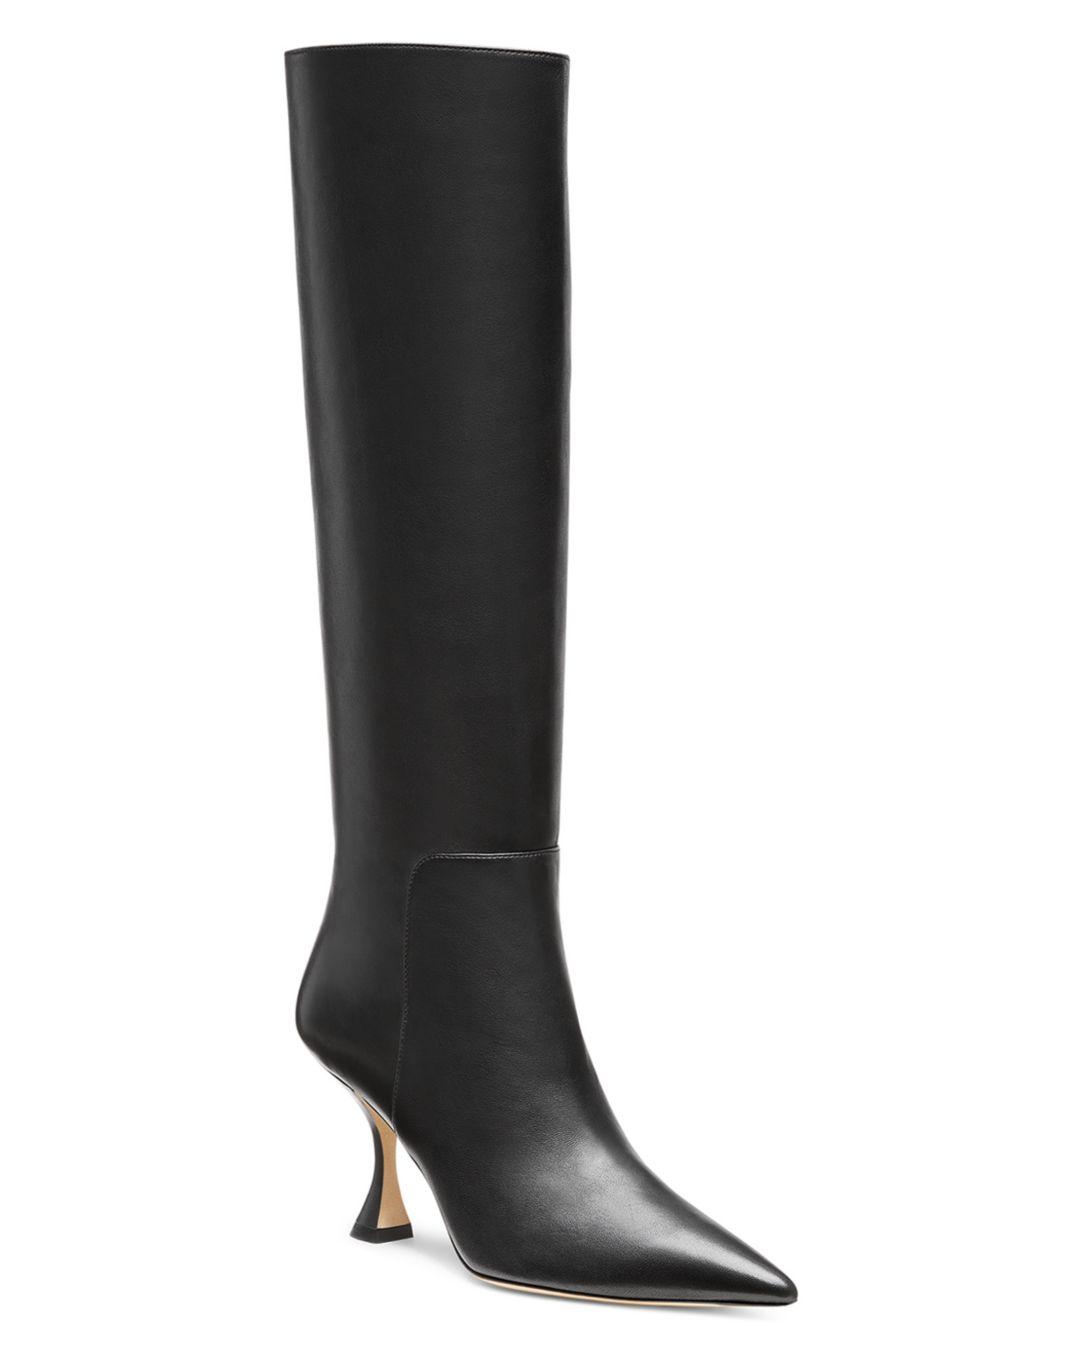 Stuart Weitzman Xcurve Pointed Toe Slouch Tall High Heel Boots in Black ...